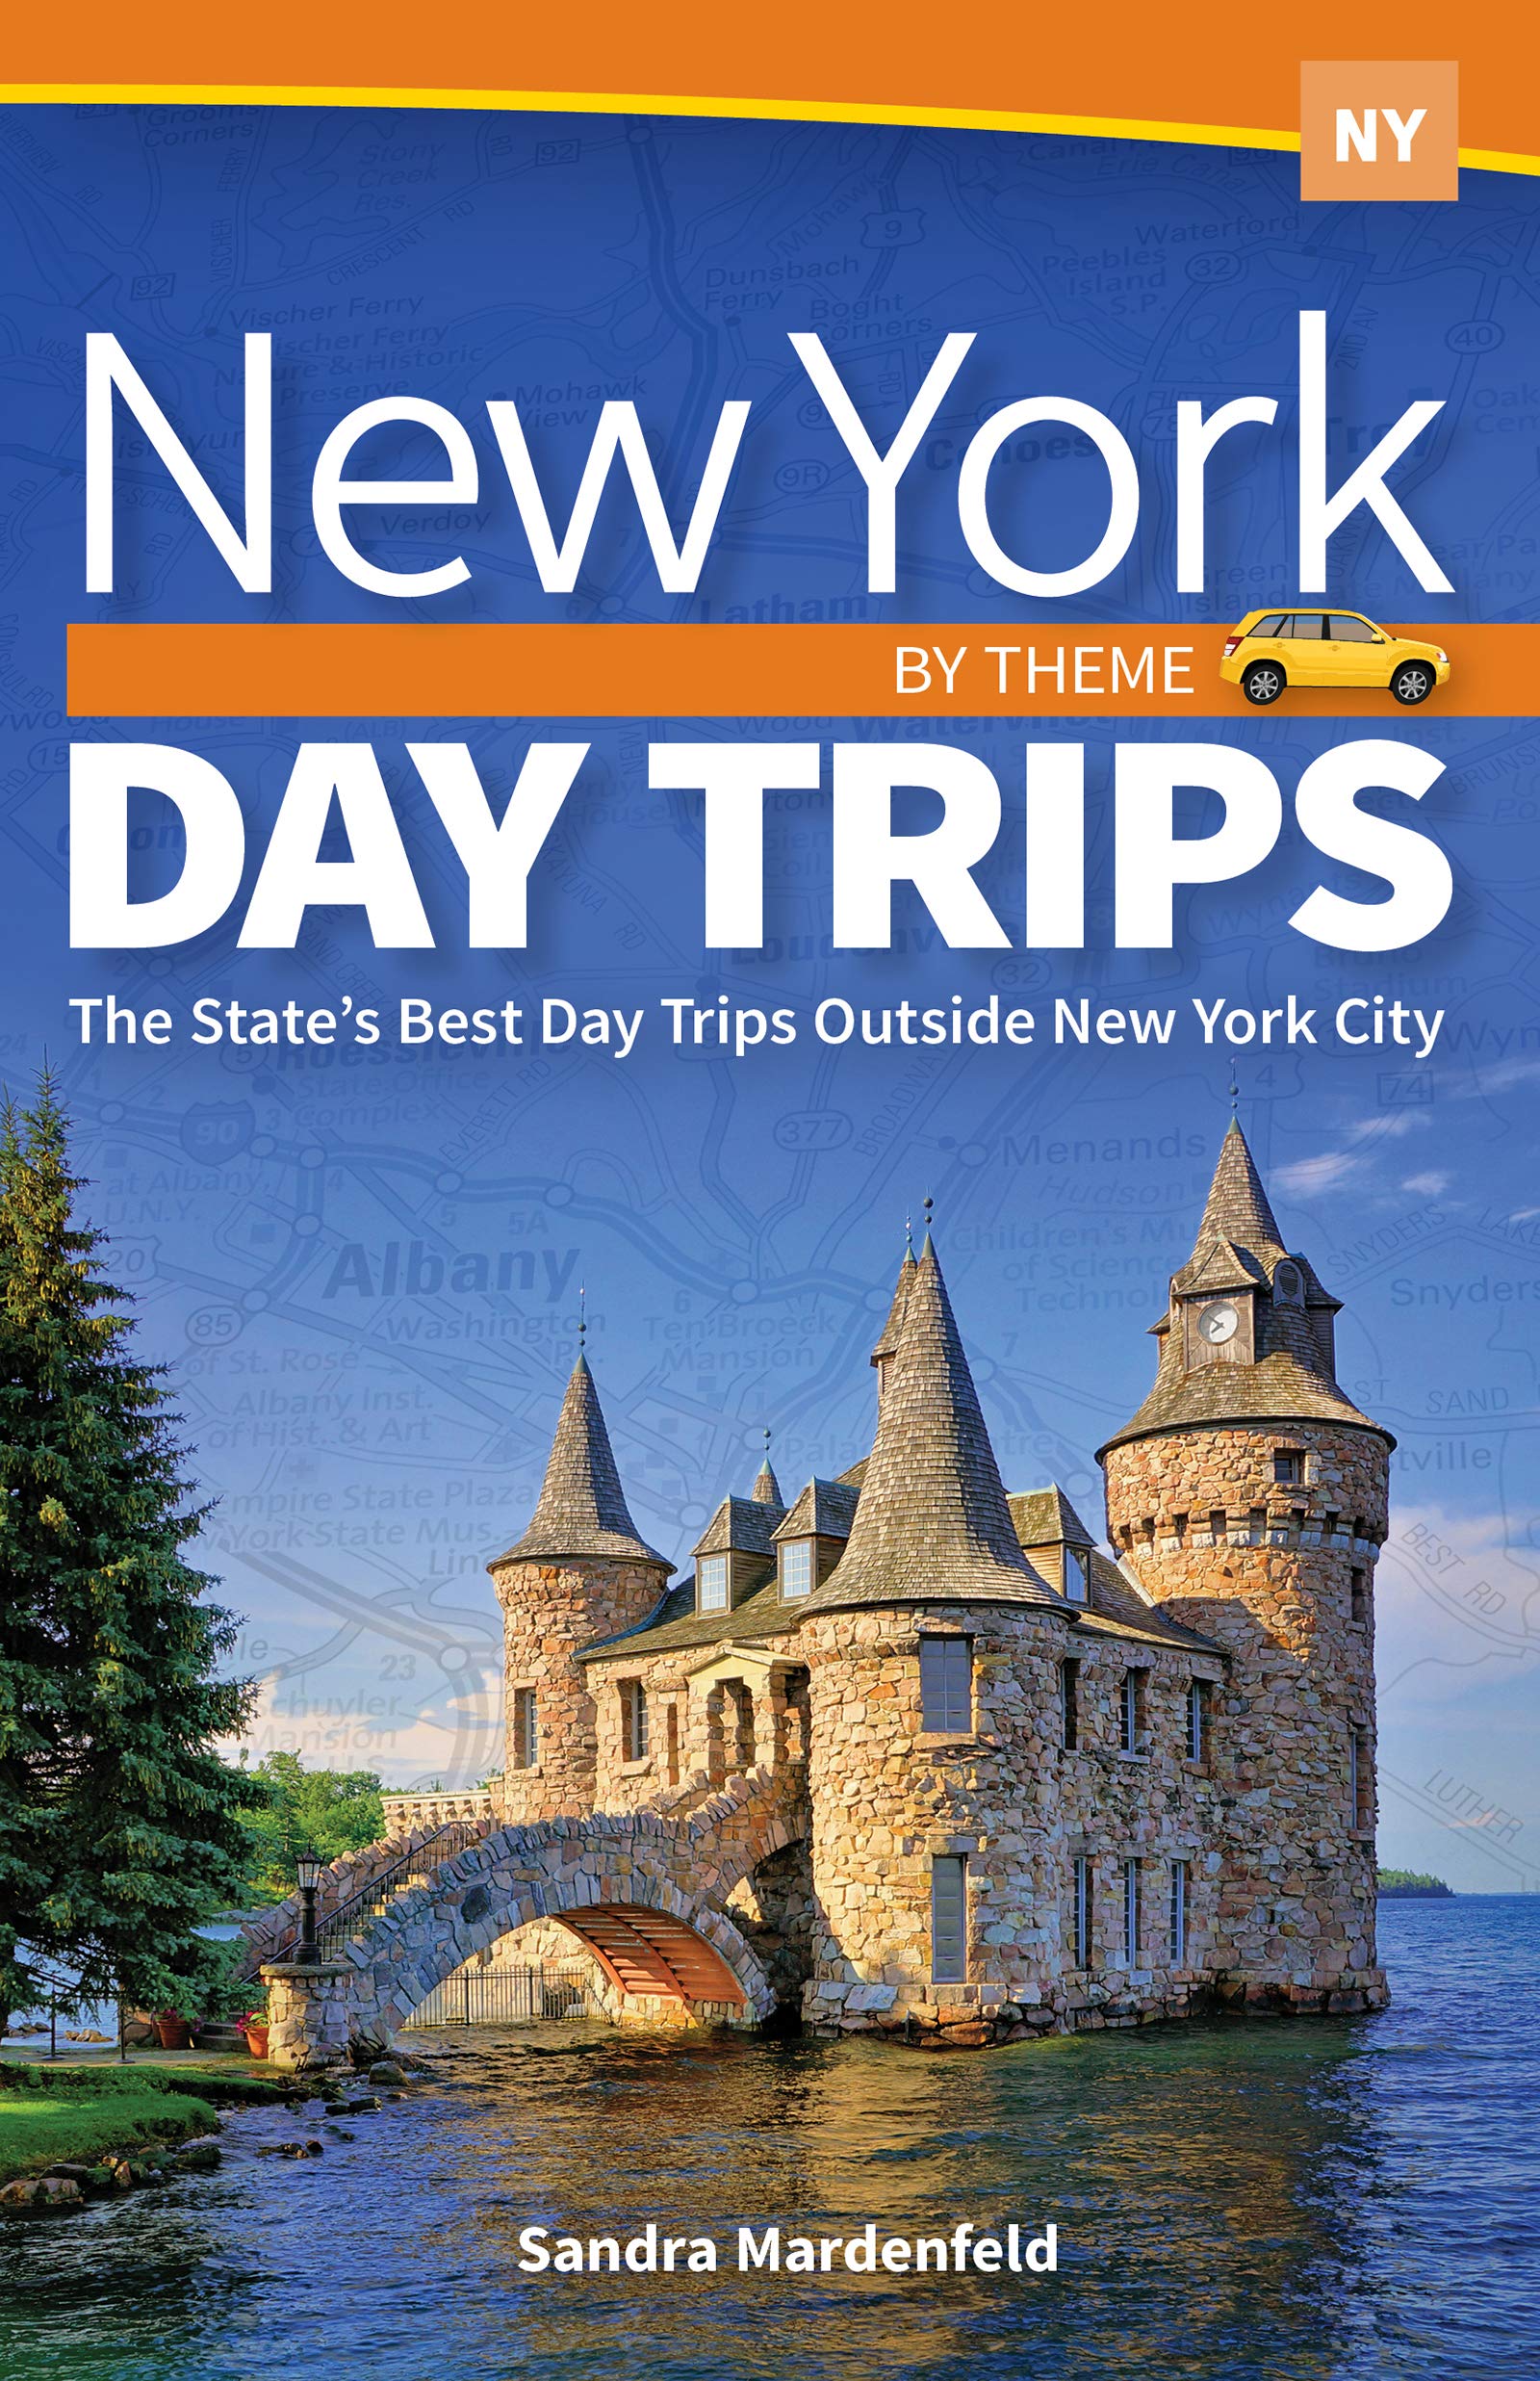 New York Day Trips by Theme: The State's Best Day Trips Outside New York City (Day Trip Series)